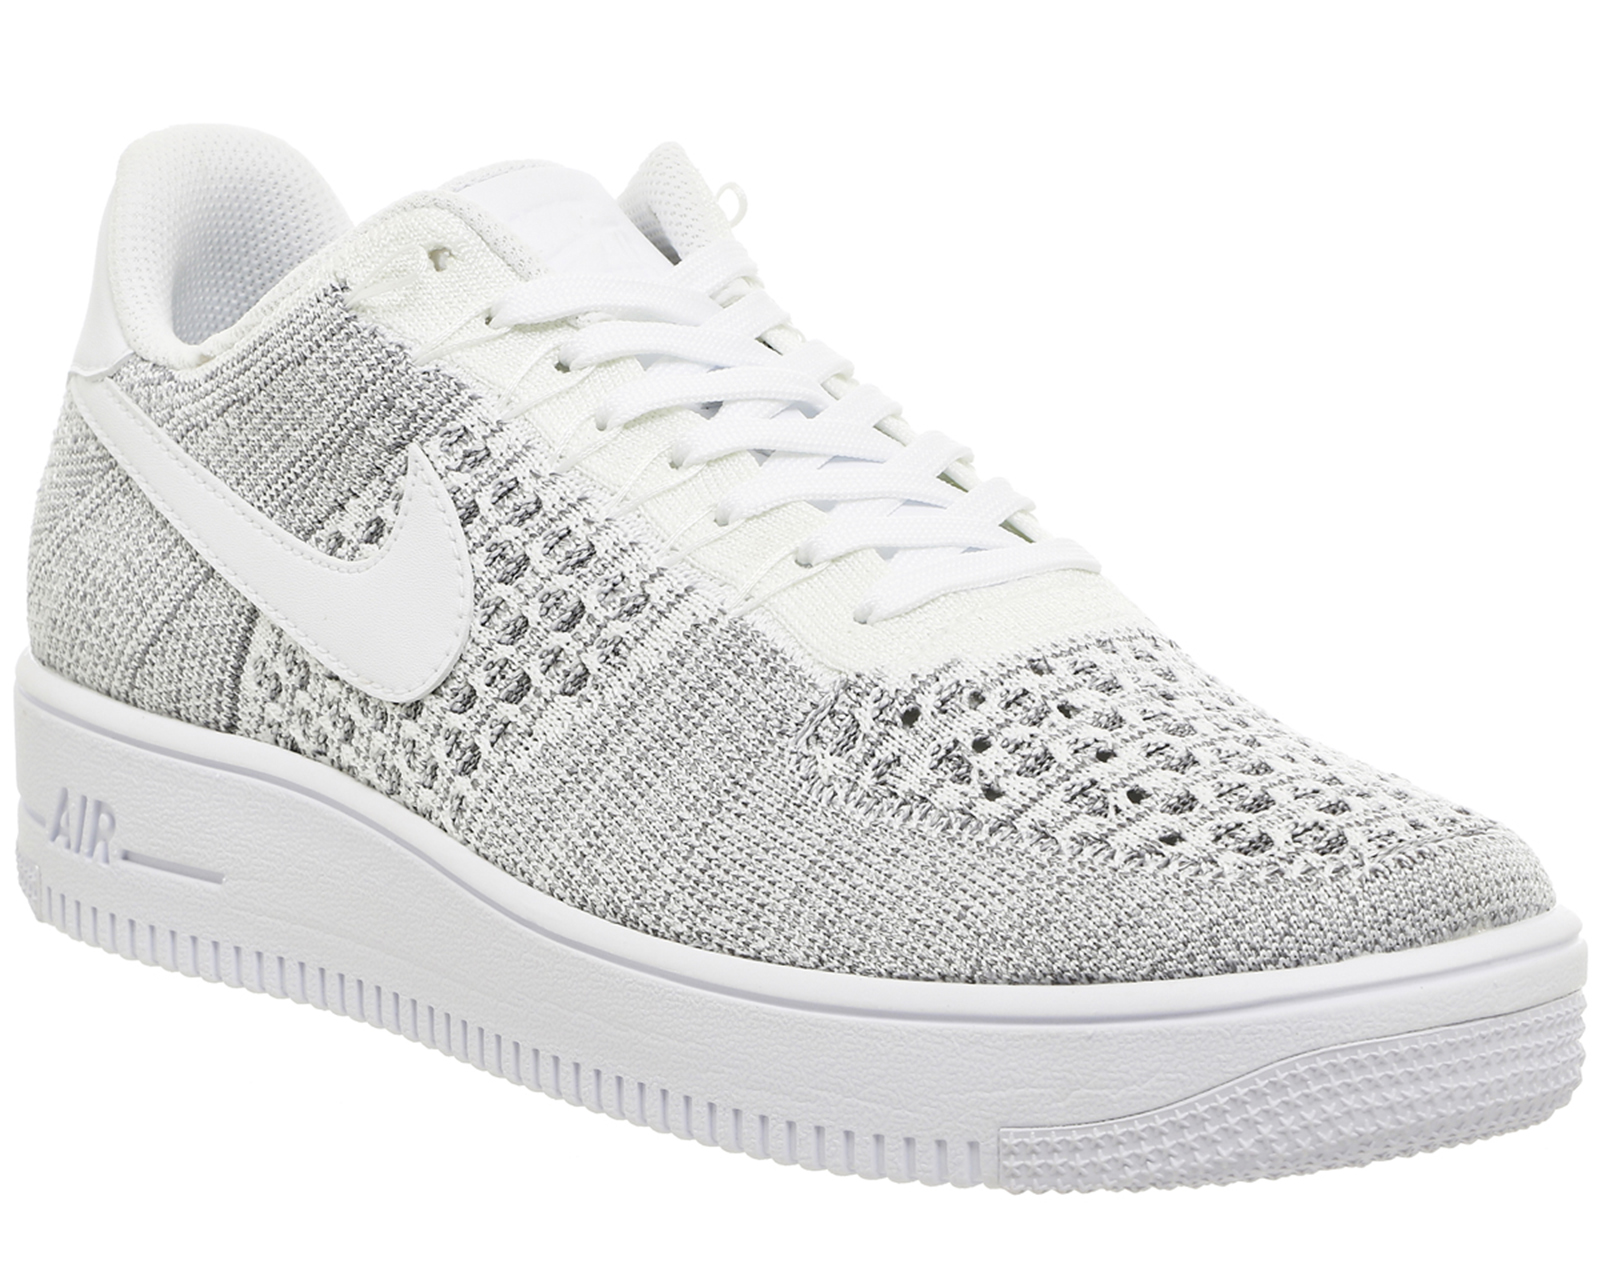 flyknit air force 1 mens